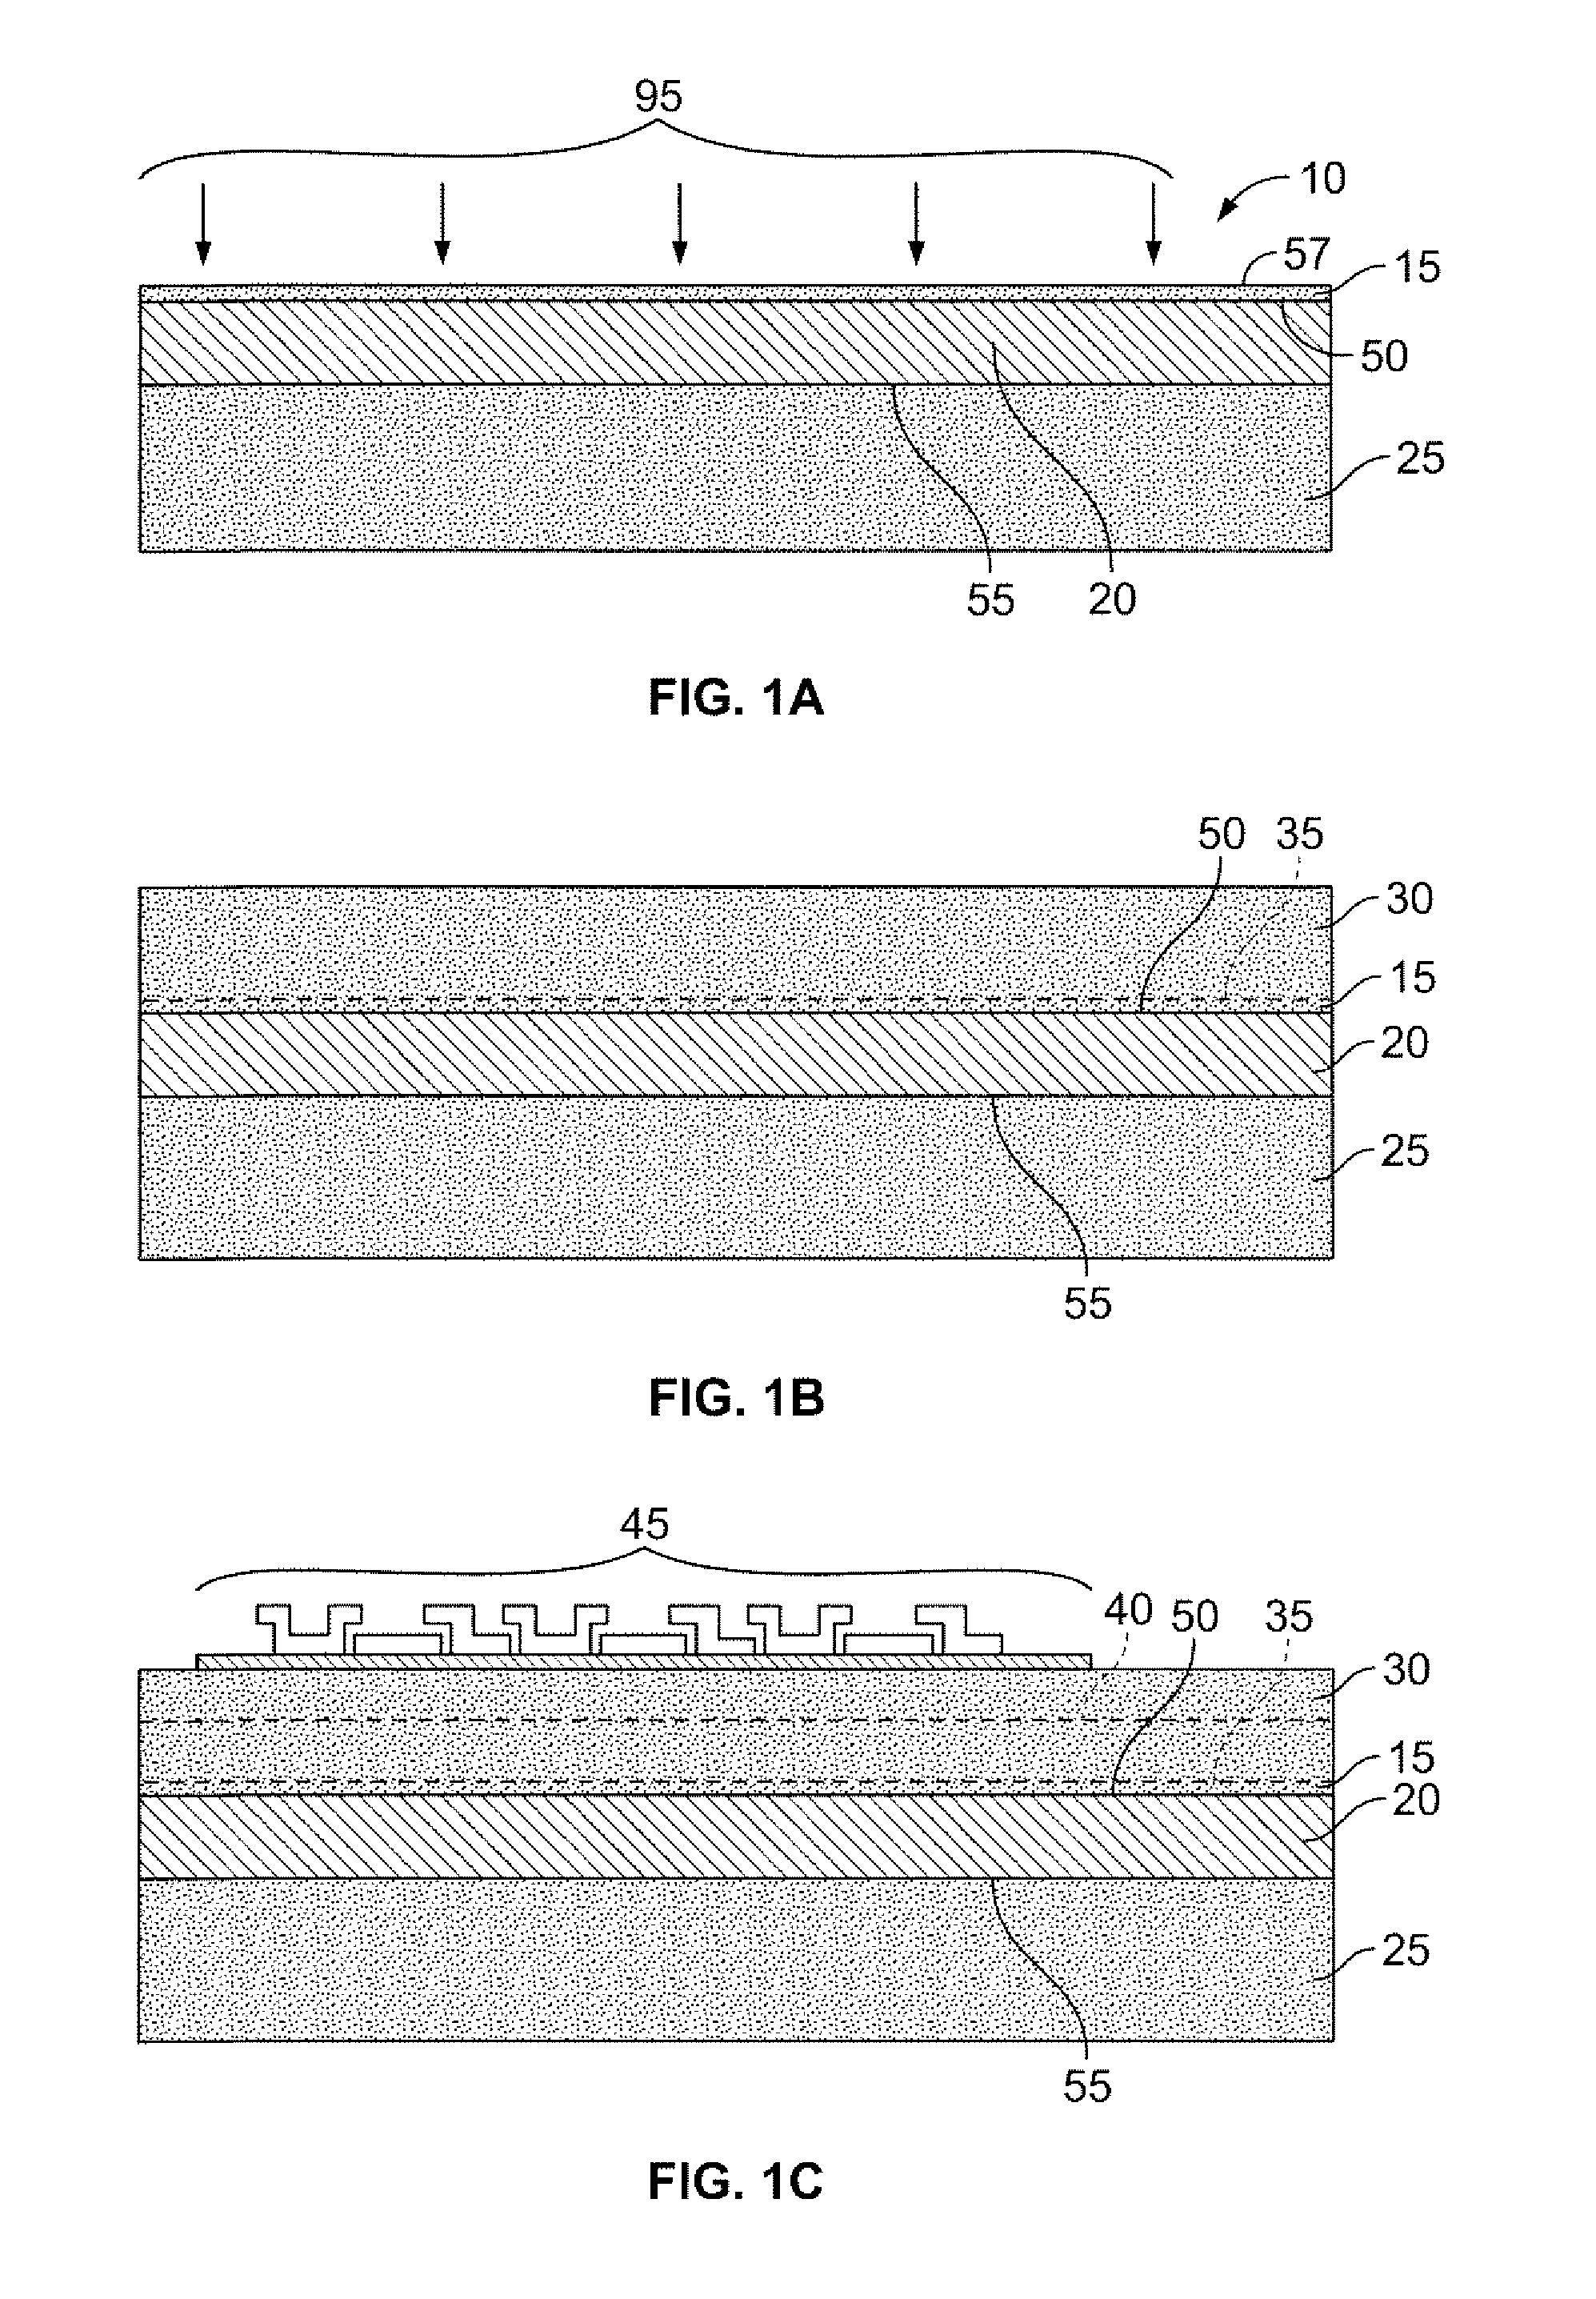 Dark Current Reduction in Back-Illuminated Imaging Sensors and Method of Fabricating Same